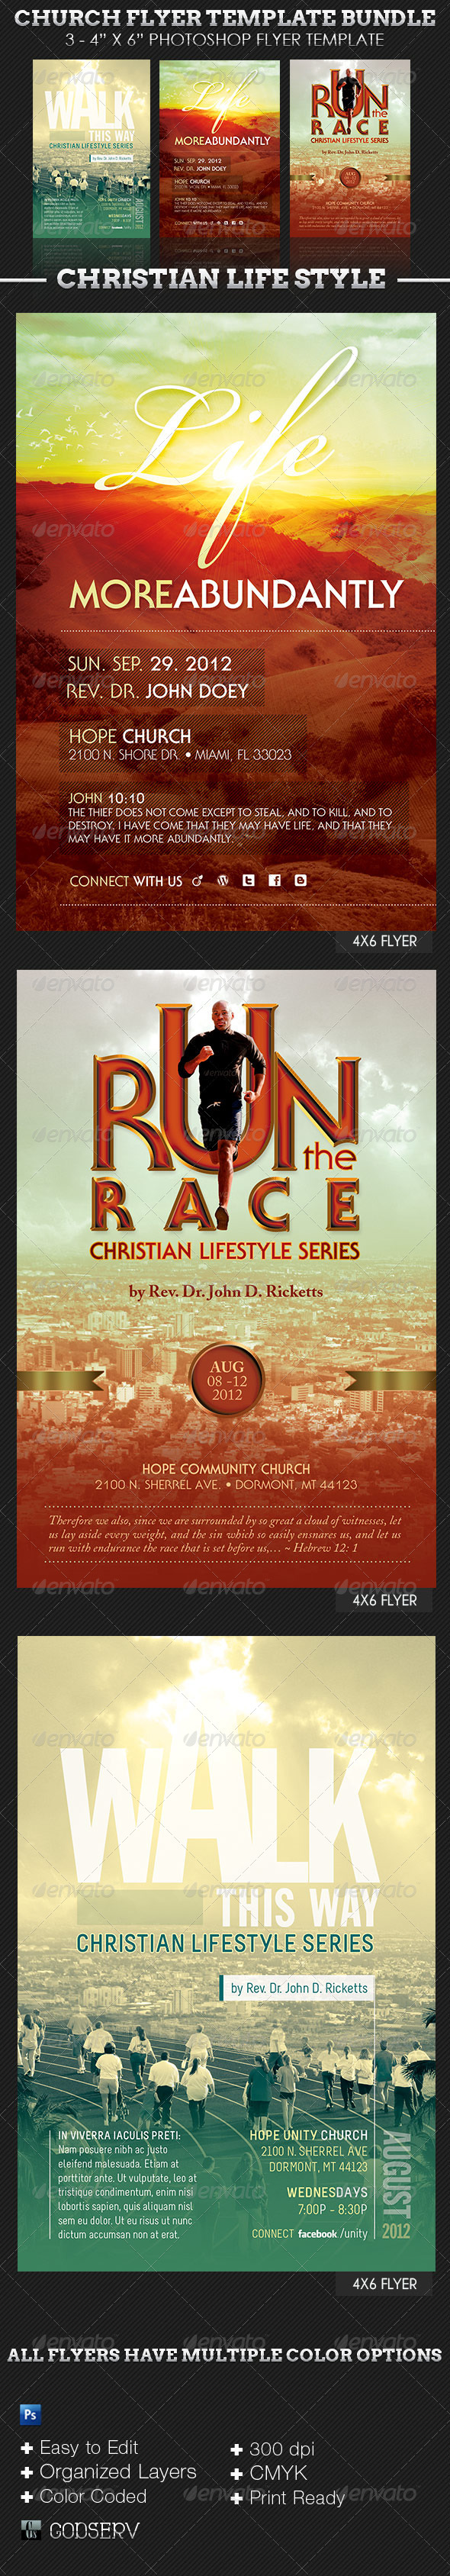 Church-Flyer-Bundle-Lifestyle-Template-Preview